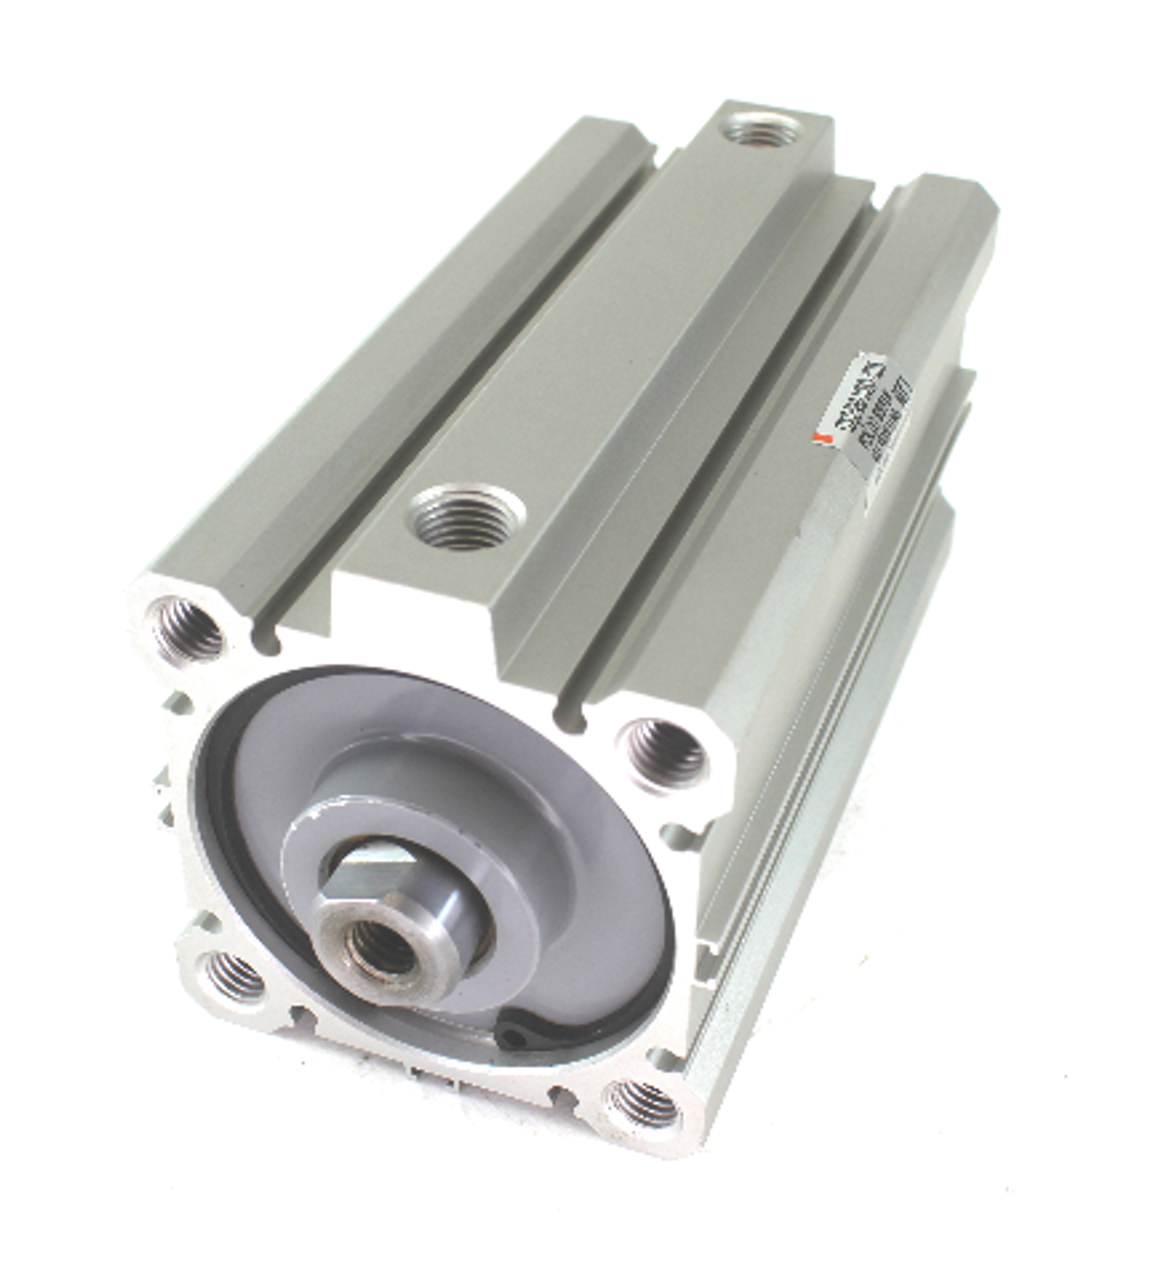 SMC CDQ2A63-100D-XC35 Compact Pneumatic Cylinder 63mm Bore 100mm Stroke